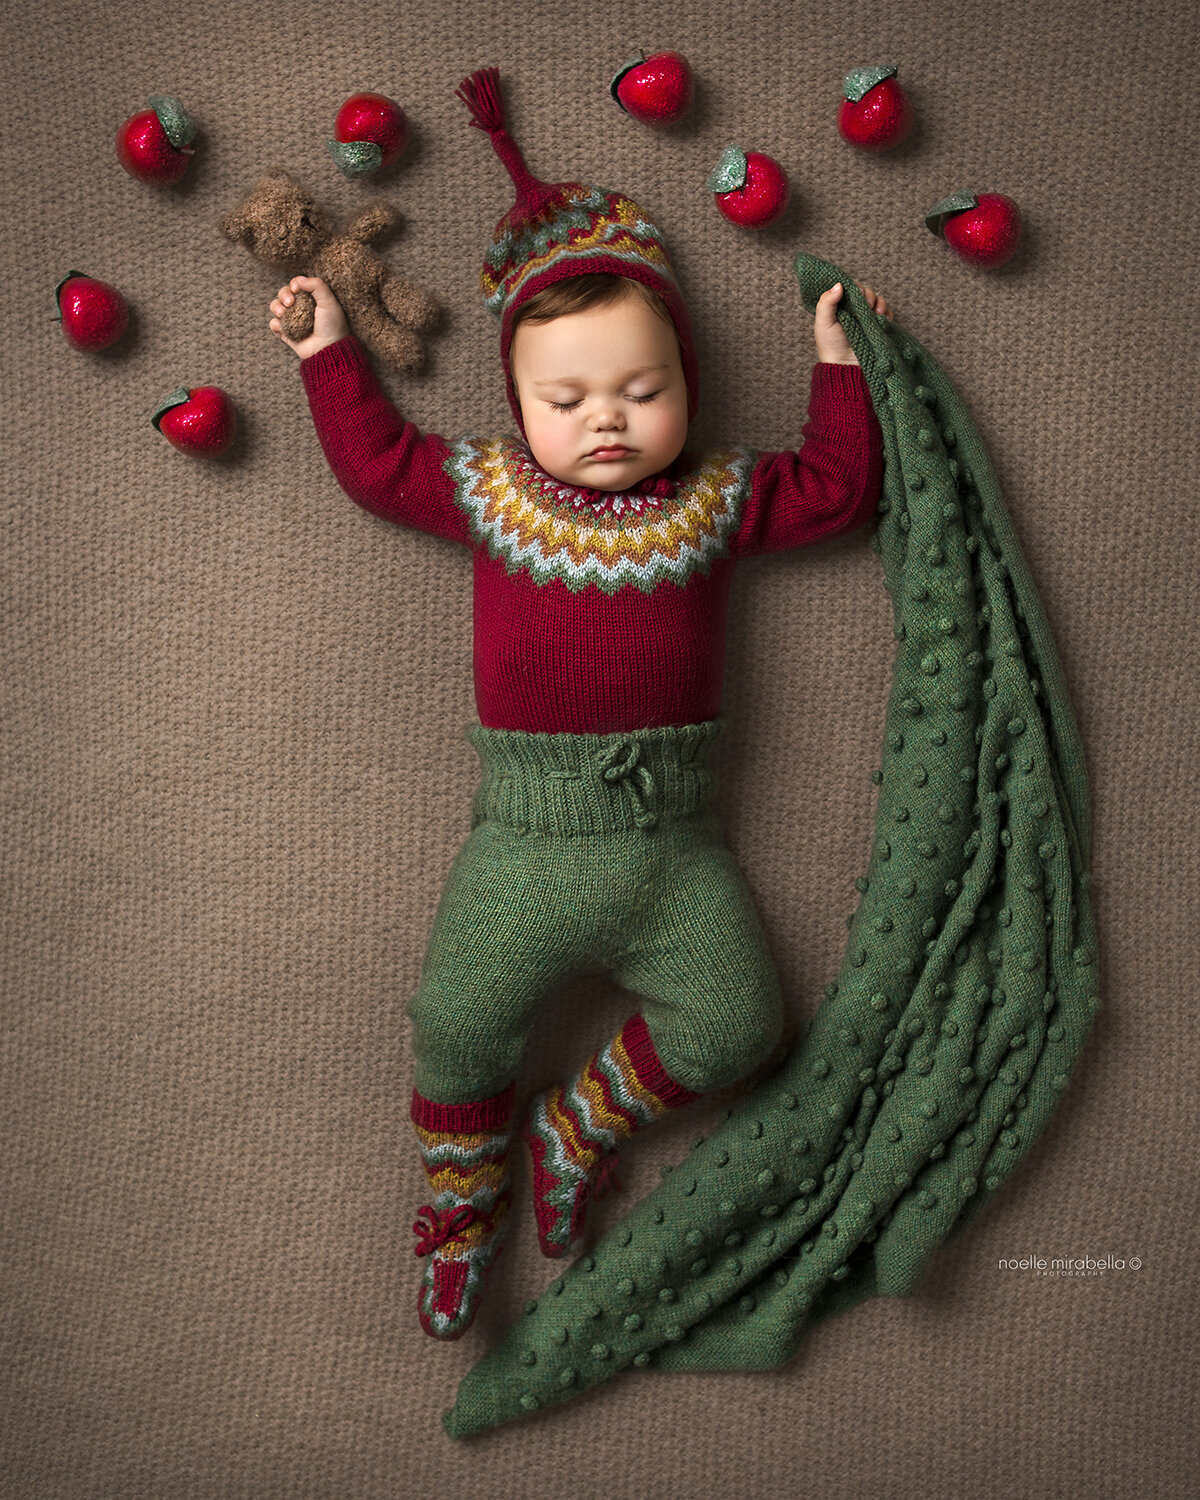 Sleeping Baby in Miou knits with sugared apples.